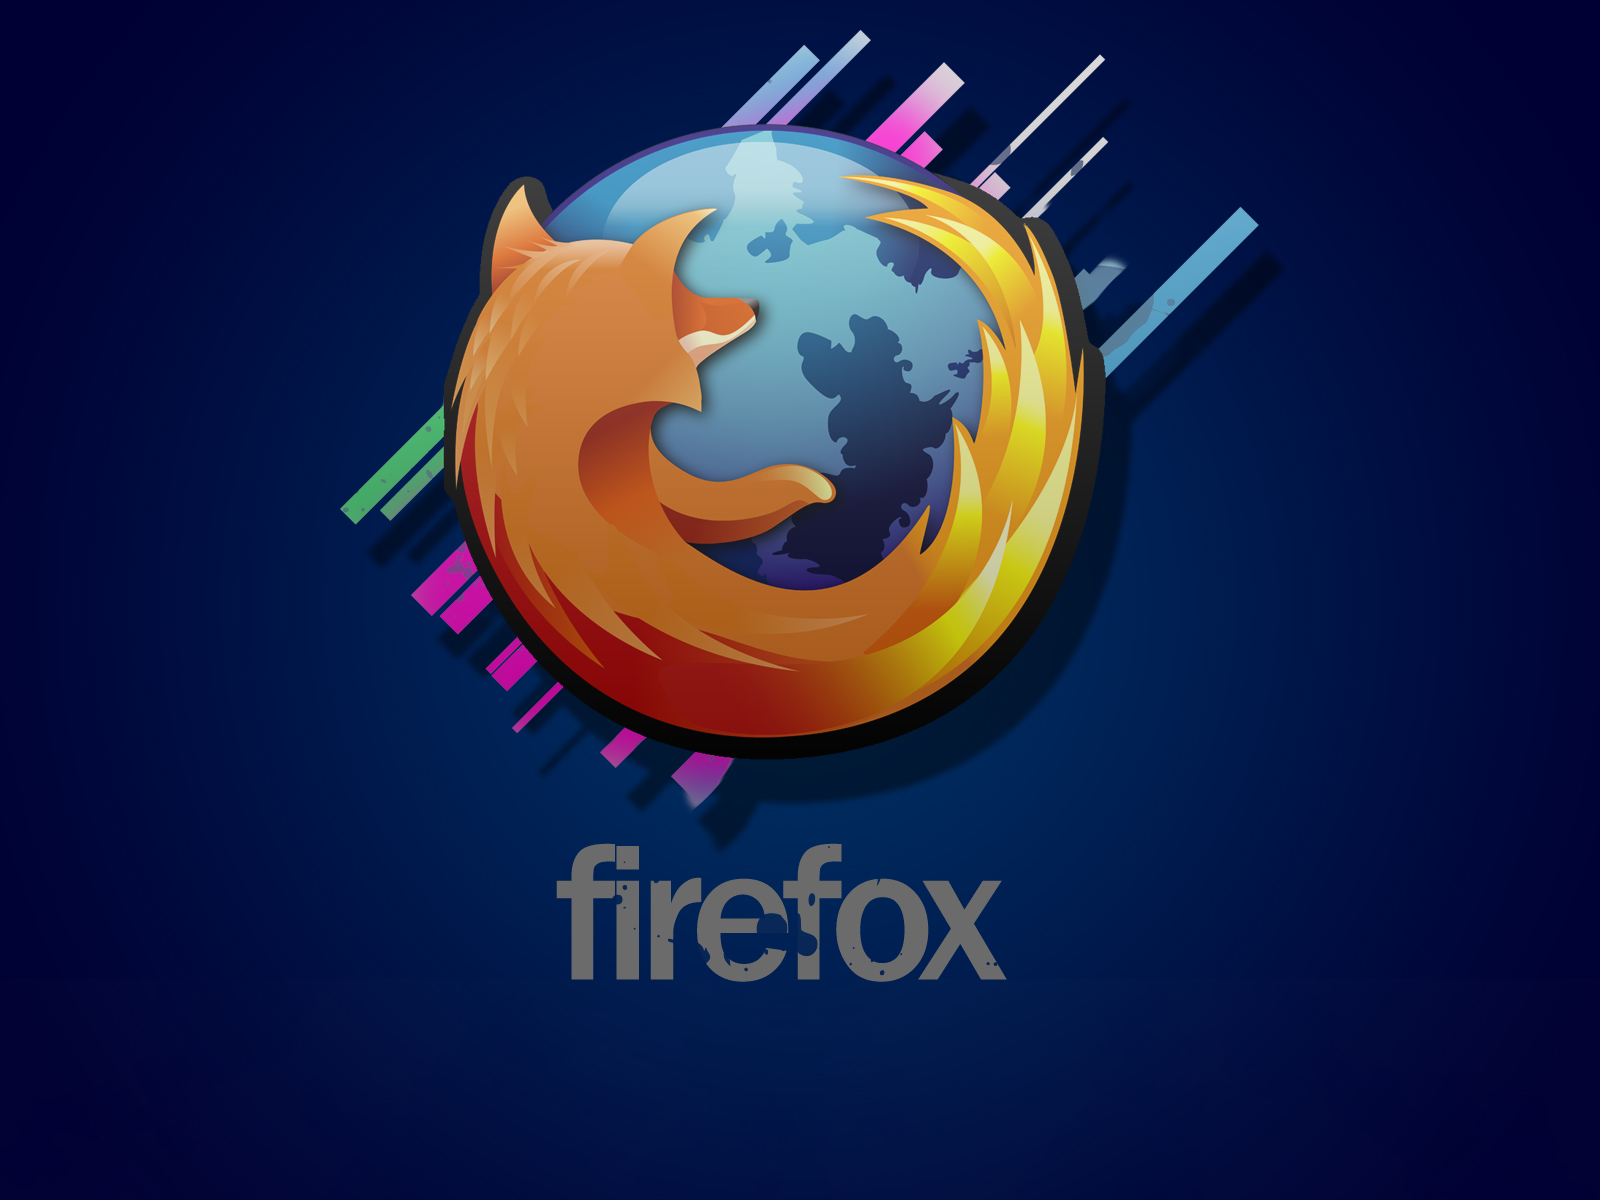 Mozilla Background Wallpaper In HD For Your Desktop